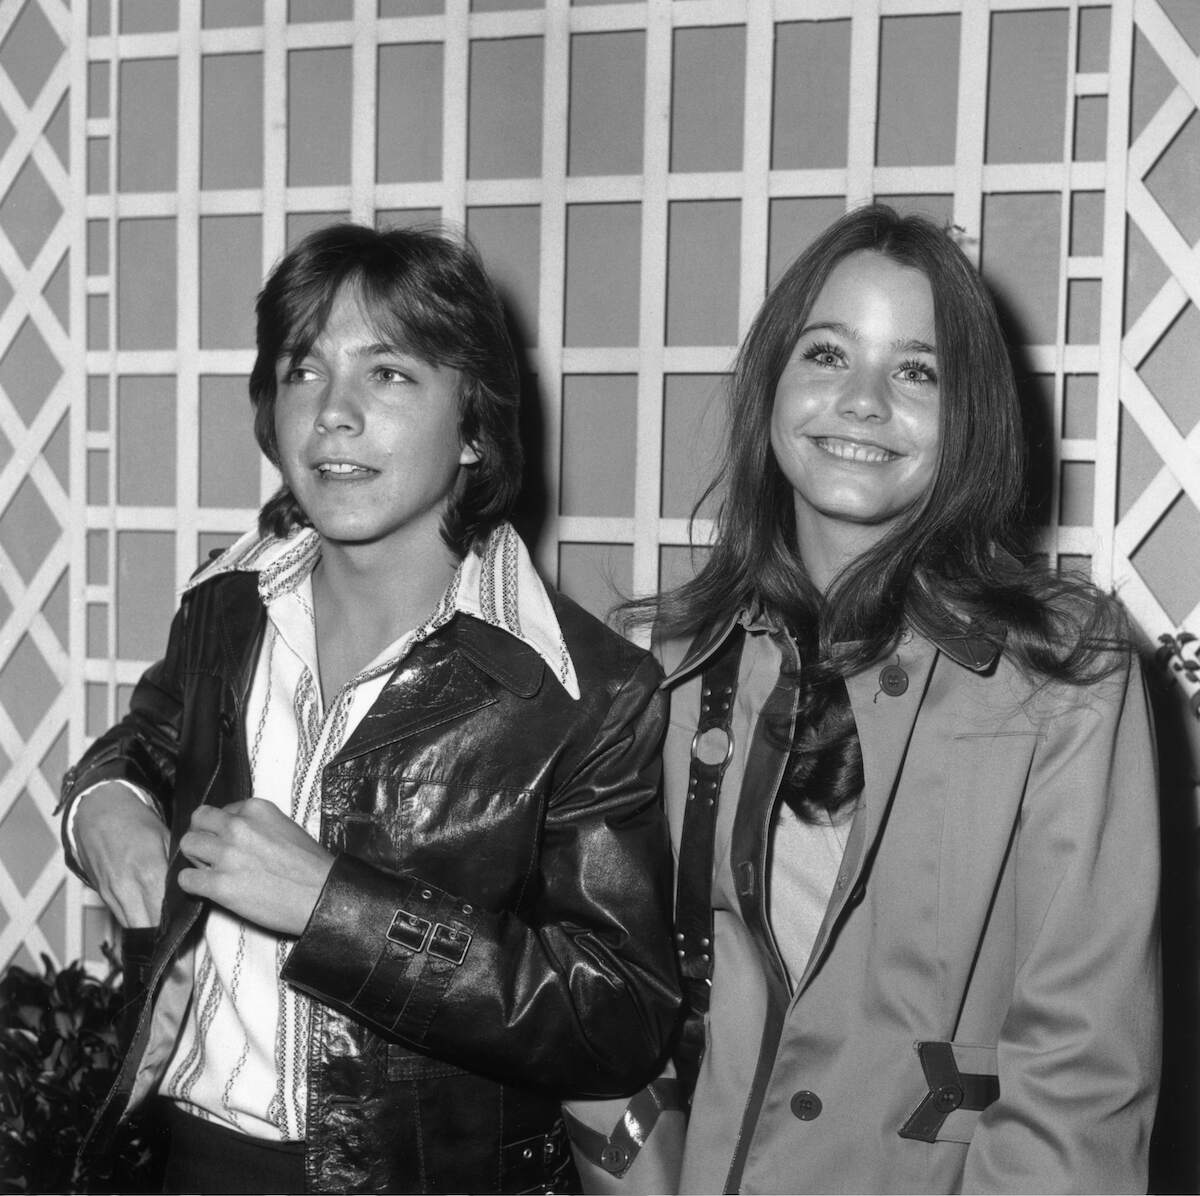 Actor and musician David Cassidy leans against wall with Susan Dey